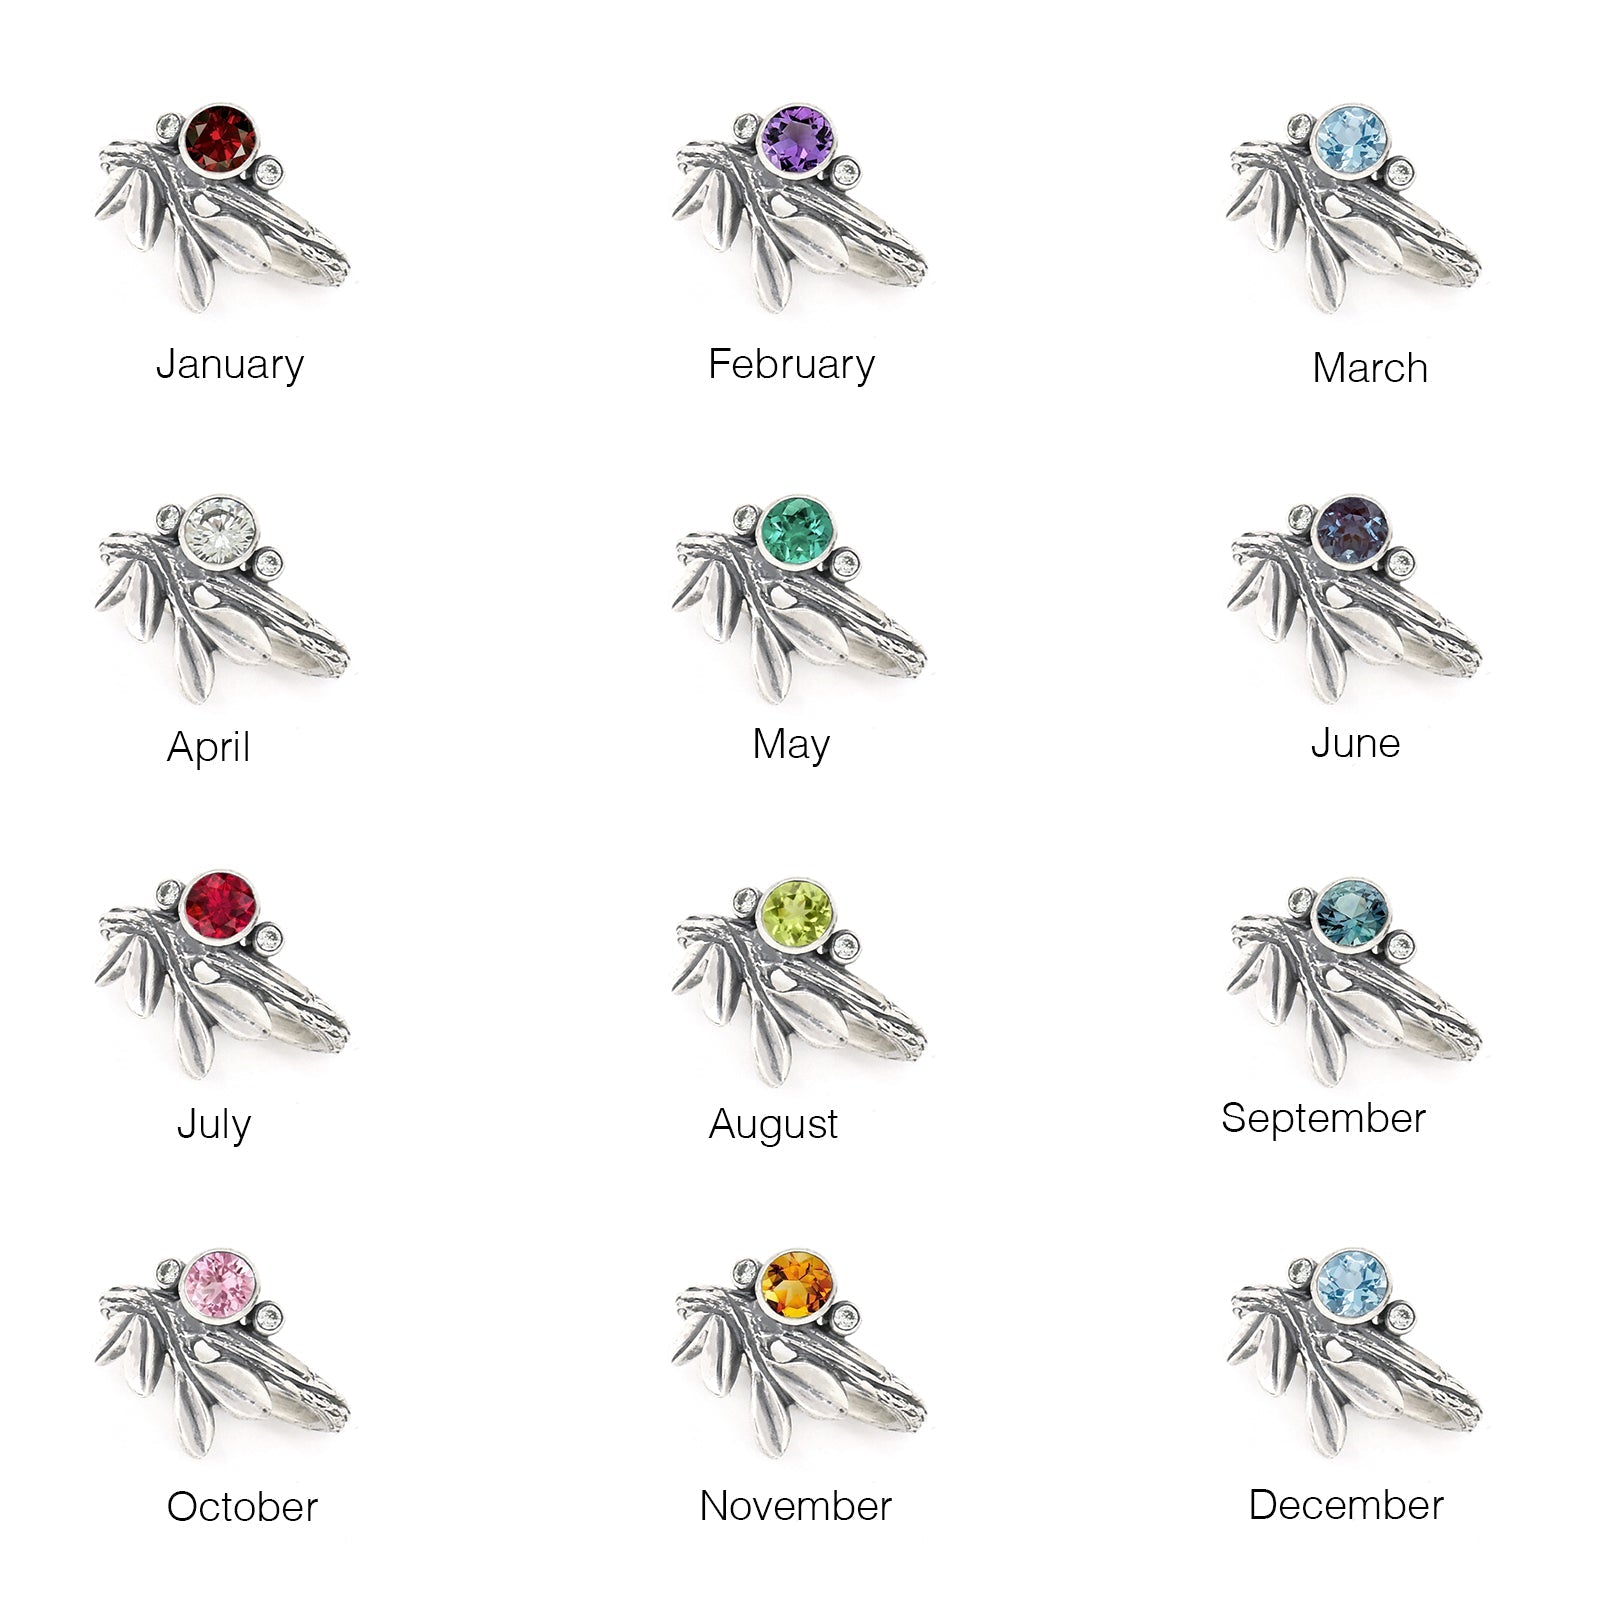 Silver Growing Love Birthstone Ring - your choice of 5mm stone - Ring October - California Pink Tourmaline January - Idaho Garnet 6757 - handmade by Beth Millner Jewelry